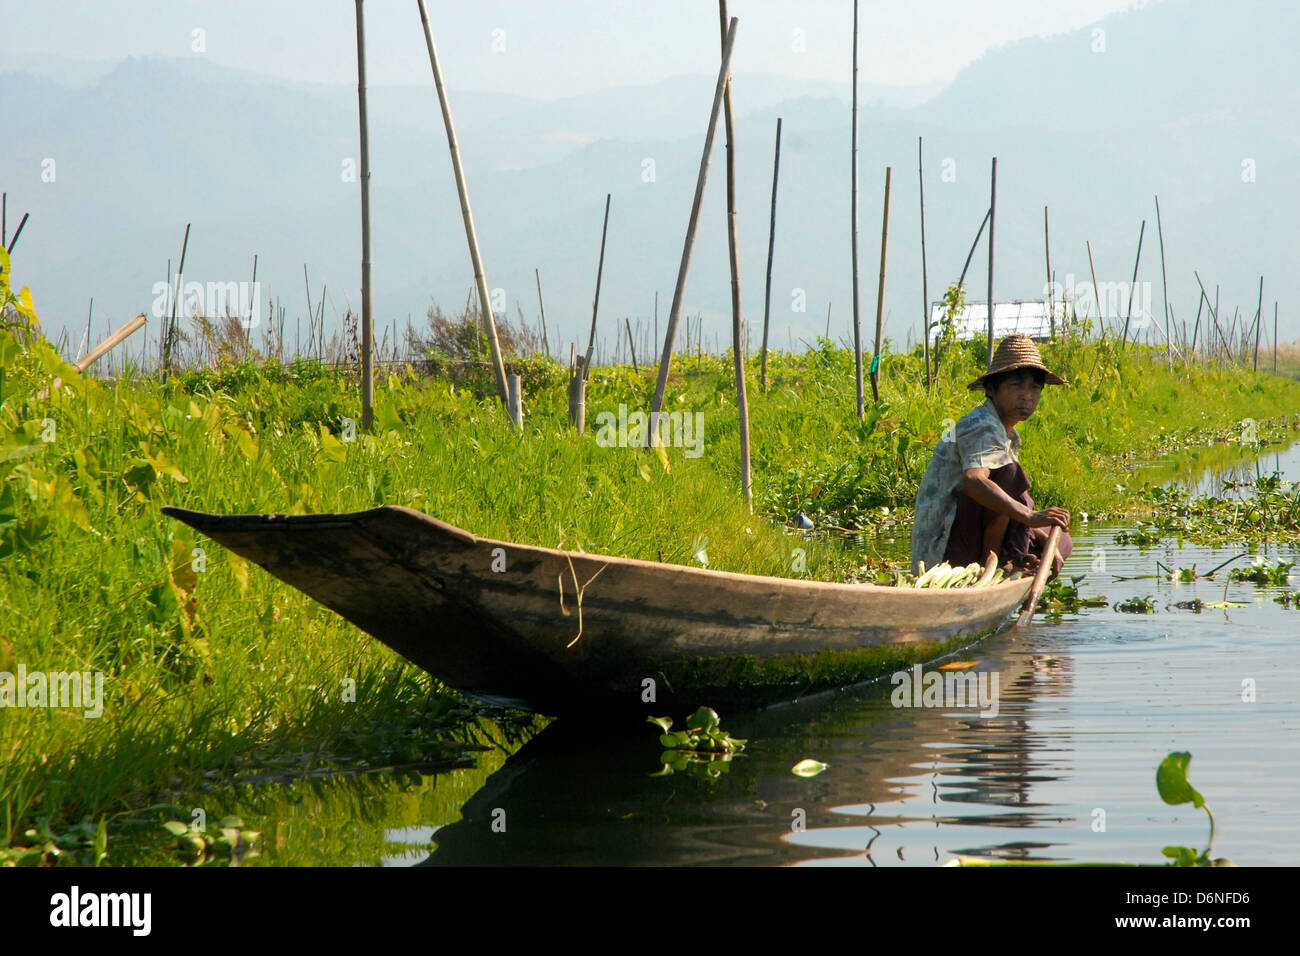 Gardener coming back from his floating garden by boat on Inle lake Stock Photo